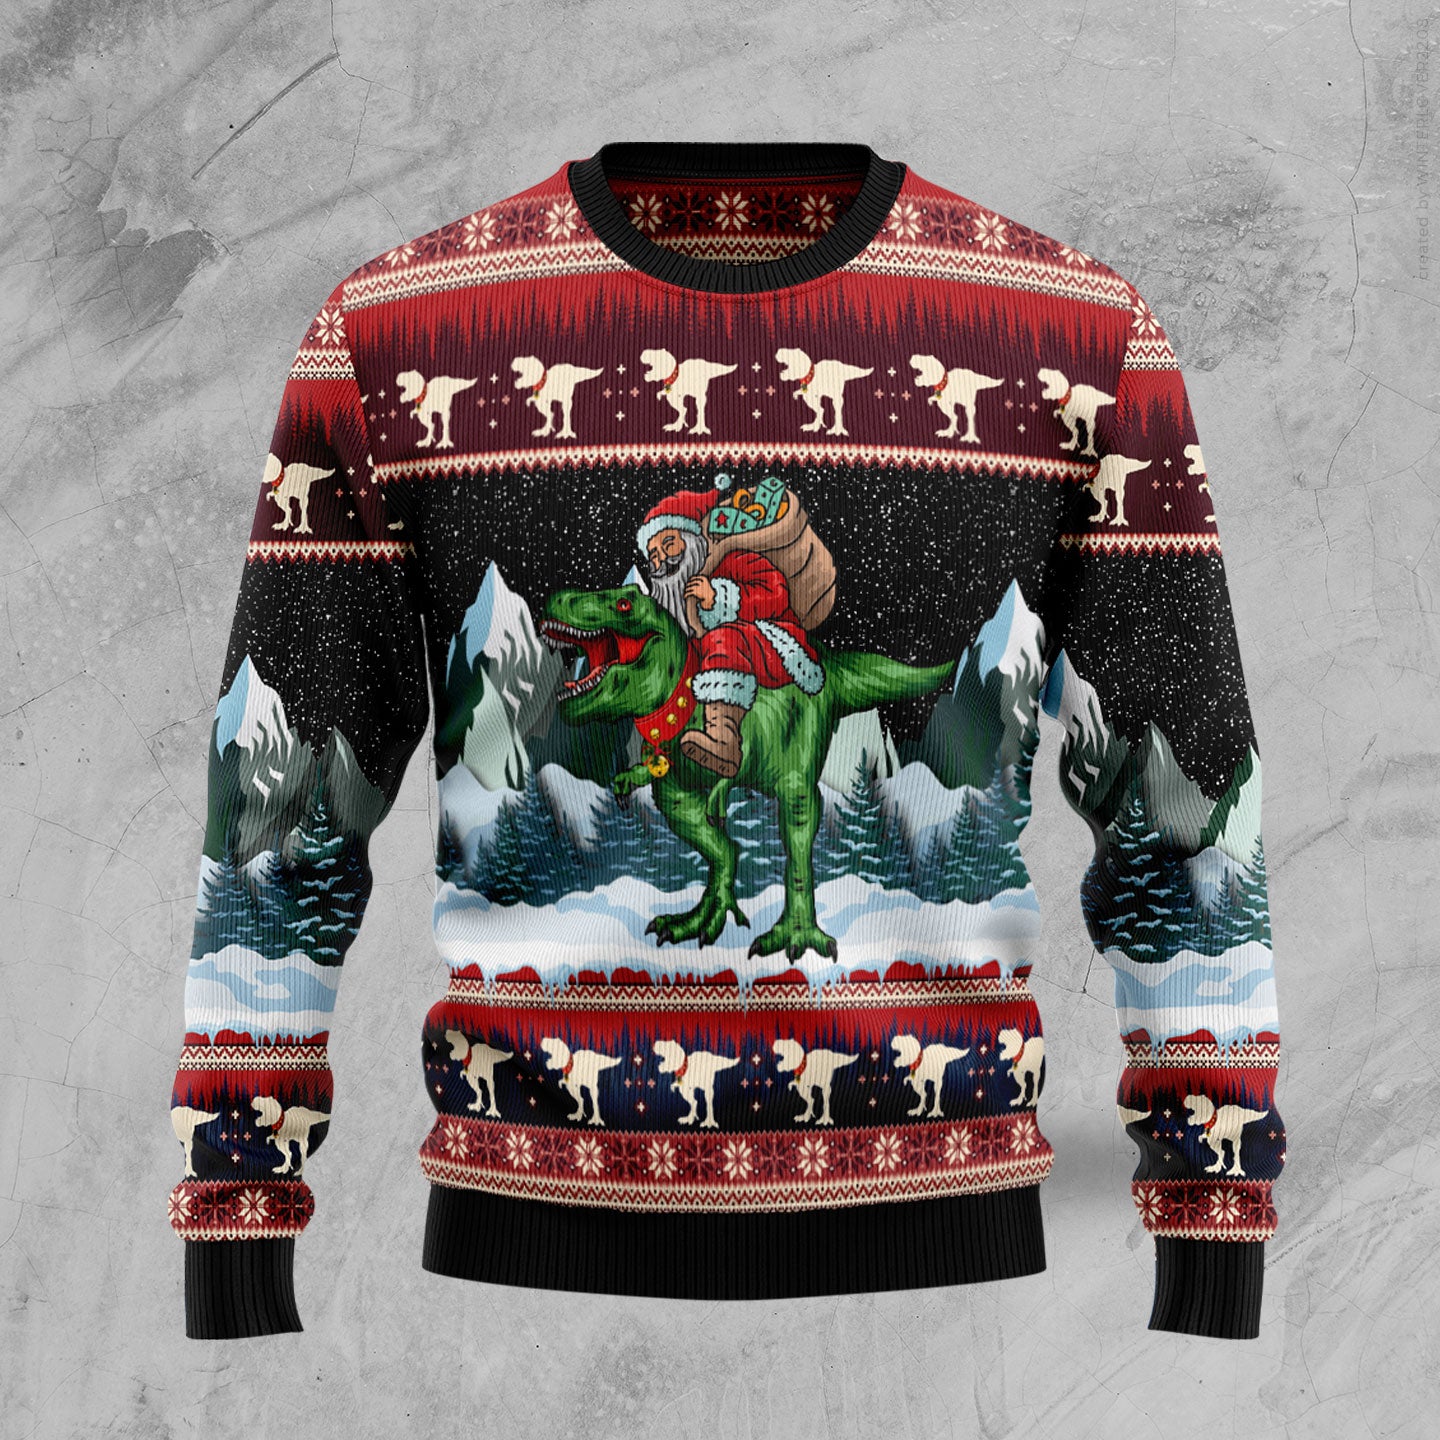 T-rex Santa Claus Ugly Christmas Sweater